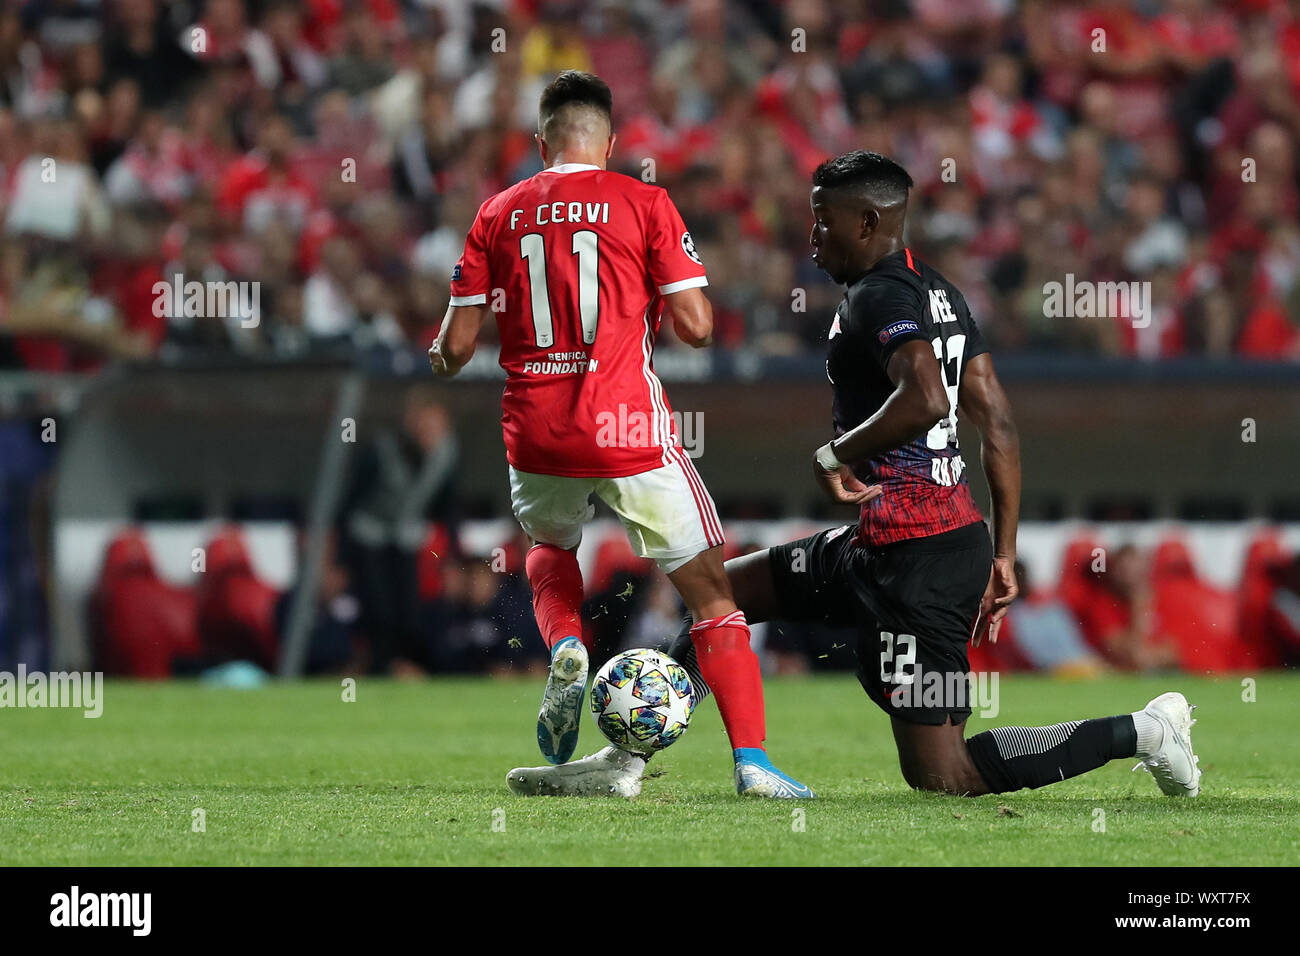 Lisbon. 17th Sep, 2019. Nordi Mukiele (R) of RB Leipzig vies with Franco Cervi of SL Benfica during the UEFA Champions League Group G football match in Lisbon, Portugal on Sept. 17, 2019. Credit: Pedro Fiuza/Xinhua Stock Photo